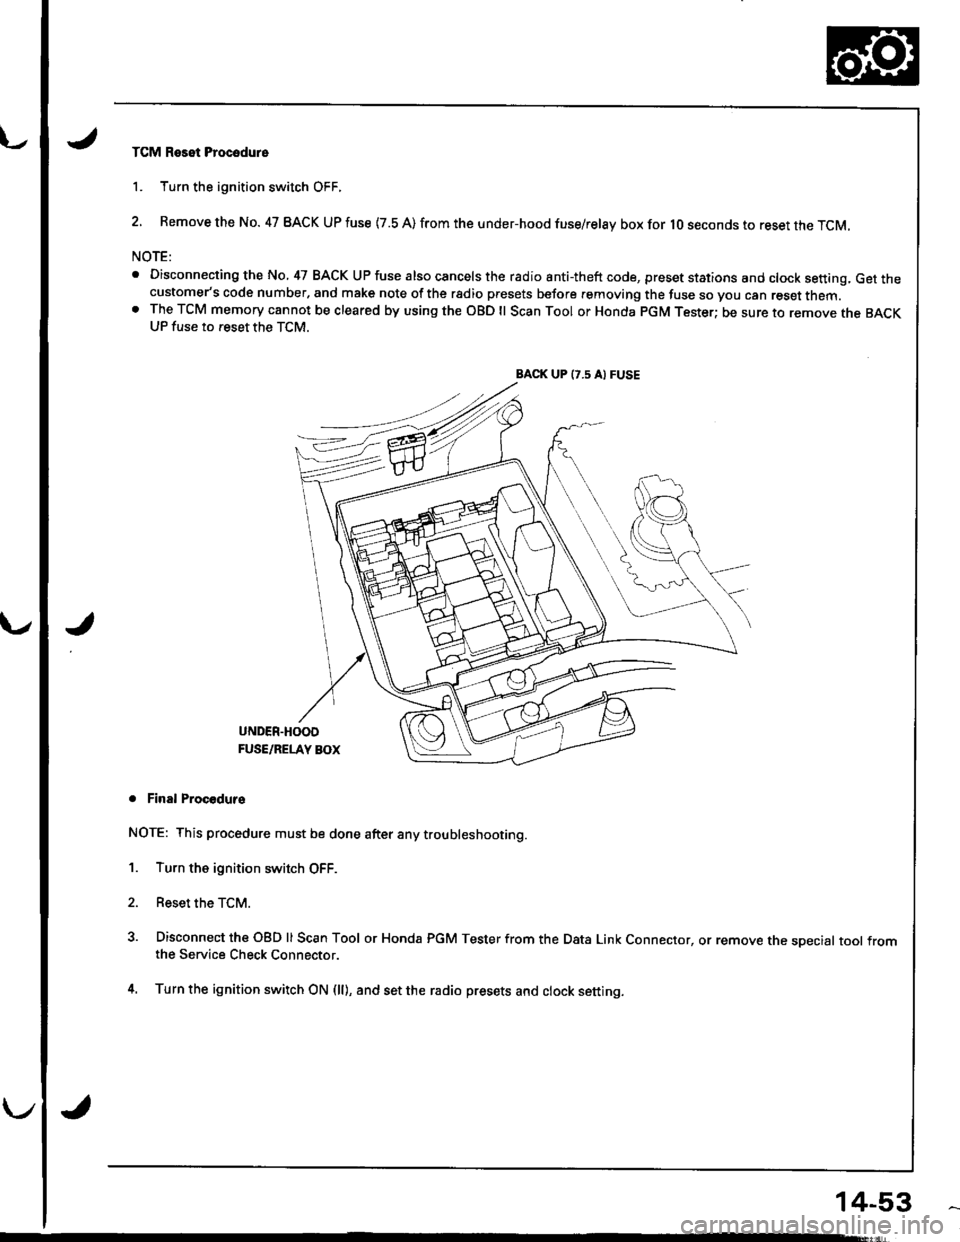 HONDA INTEGRA 1998 4.G User Guide TCM Reset Procodure
1. Turn the ignition switch OFF.
2. Remove the No. 47 BACK UP fuse {7.8 A) from the under-hood fuse/relay box for lO seconds to reset the TCM.
NOTE:
. Disconnecting the No, 47 BACK